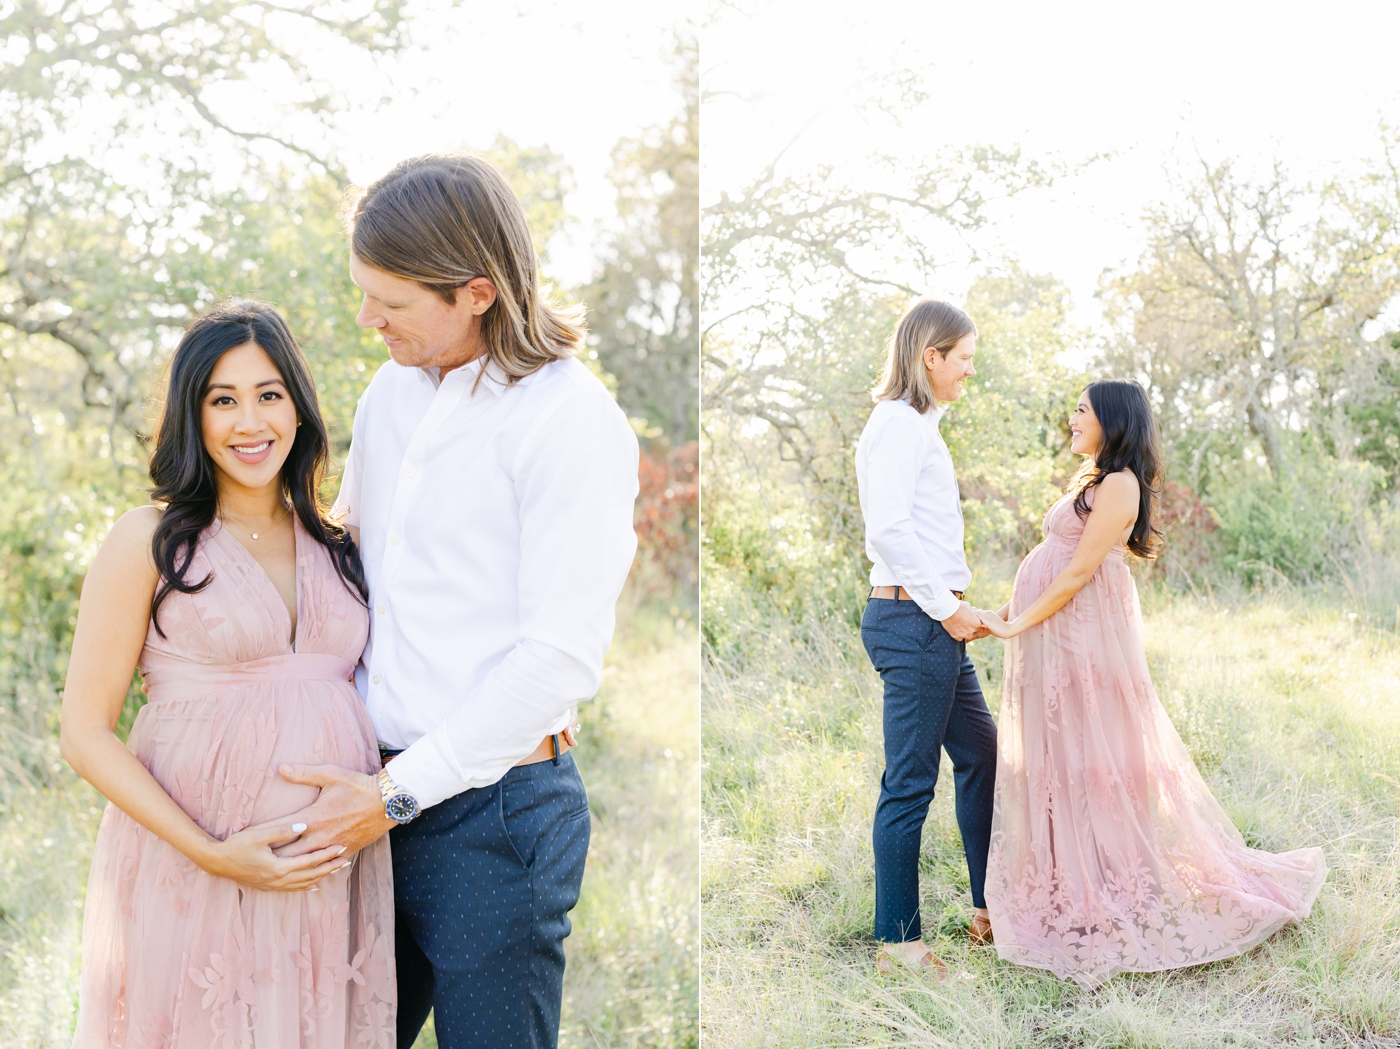 Maternity photoshoot with Mom in gorgeous lace maxi dress by Round Rock TX maternity photographer, Sana Ahmed Photography.